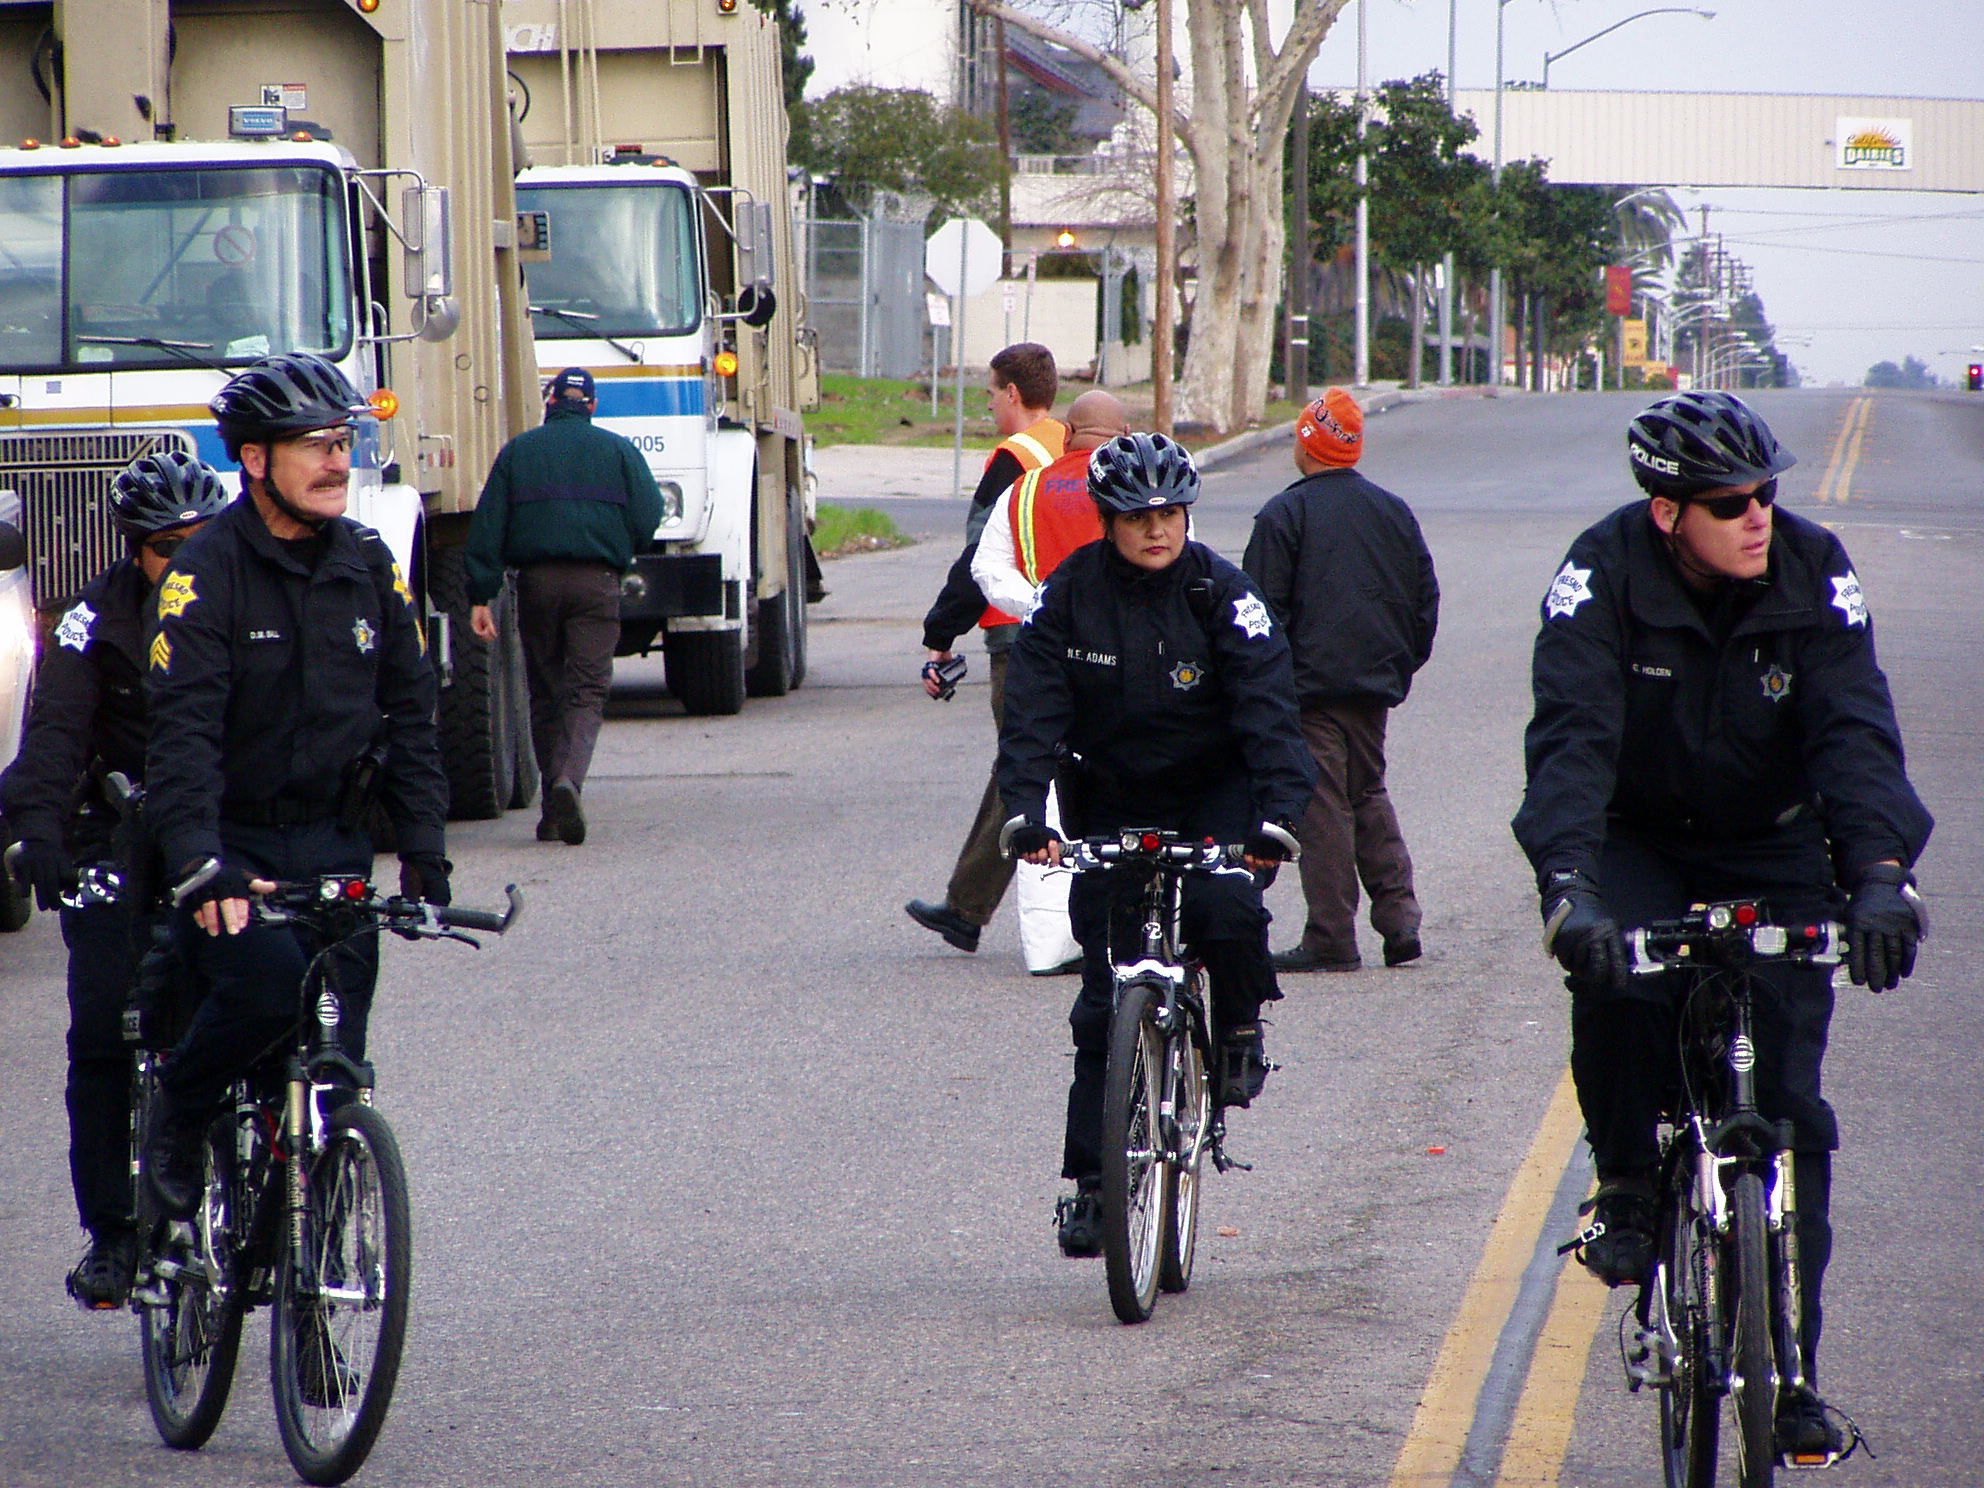 These police officers, arriving on bicycles, had come to evict the homeless on Santa Clara Street. 